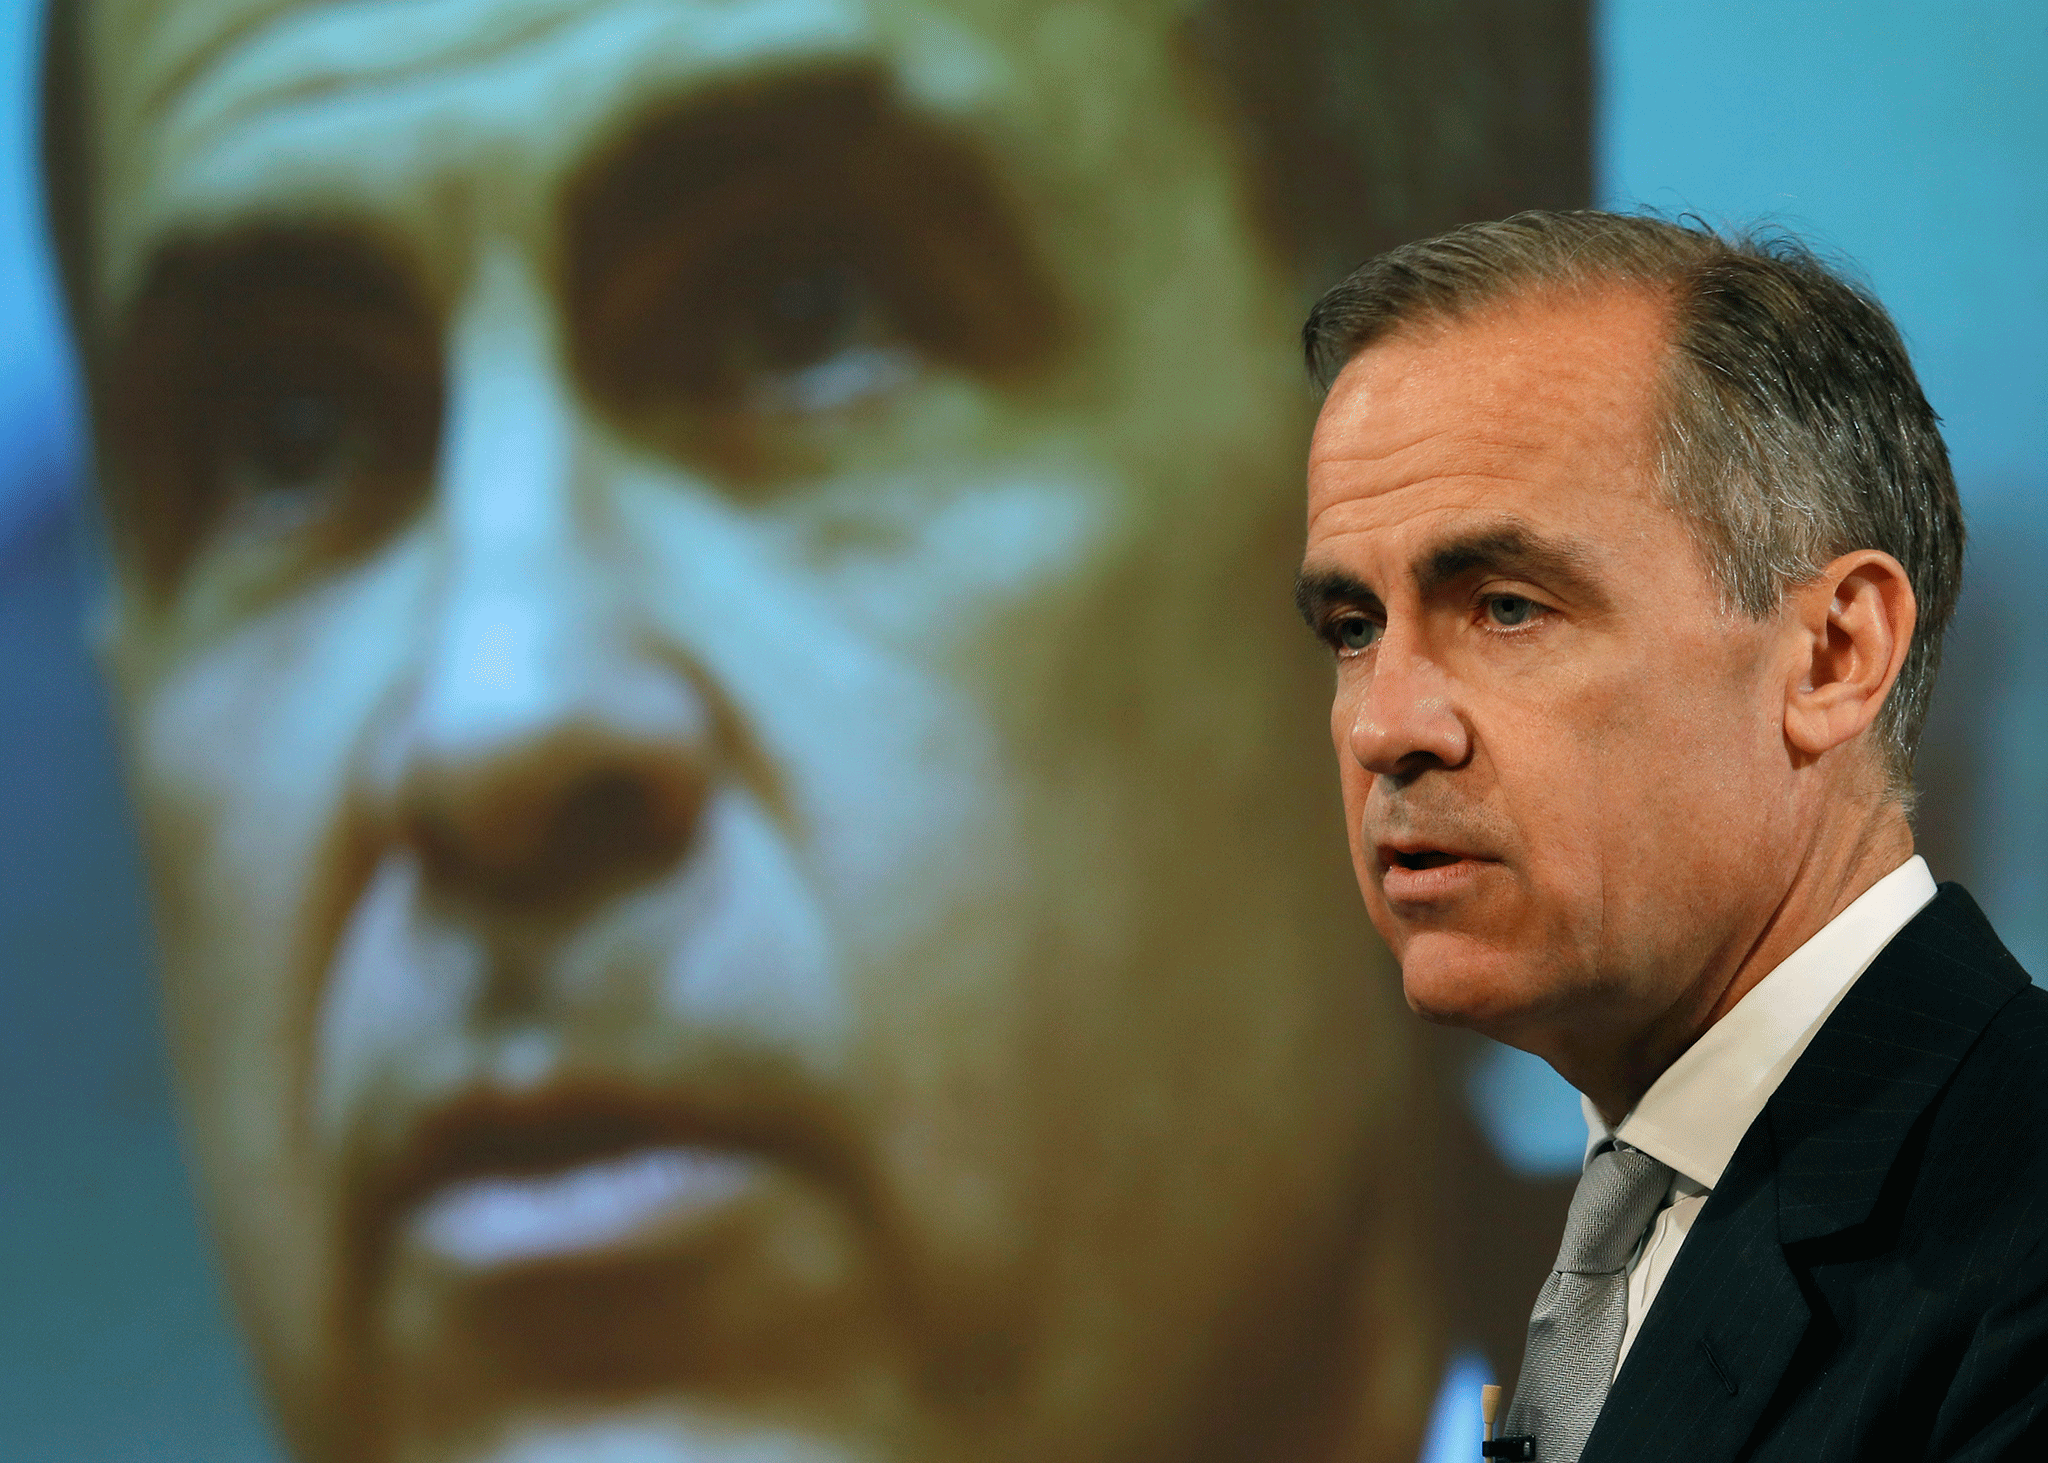 Mark Carney, speaks at a Reuters event in London, April 7, 2017